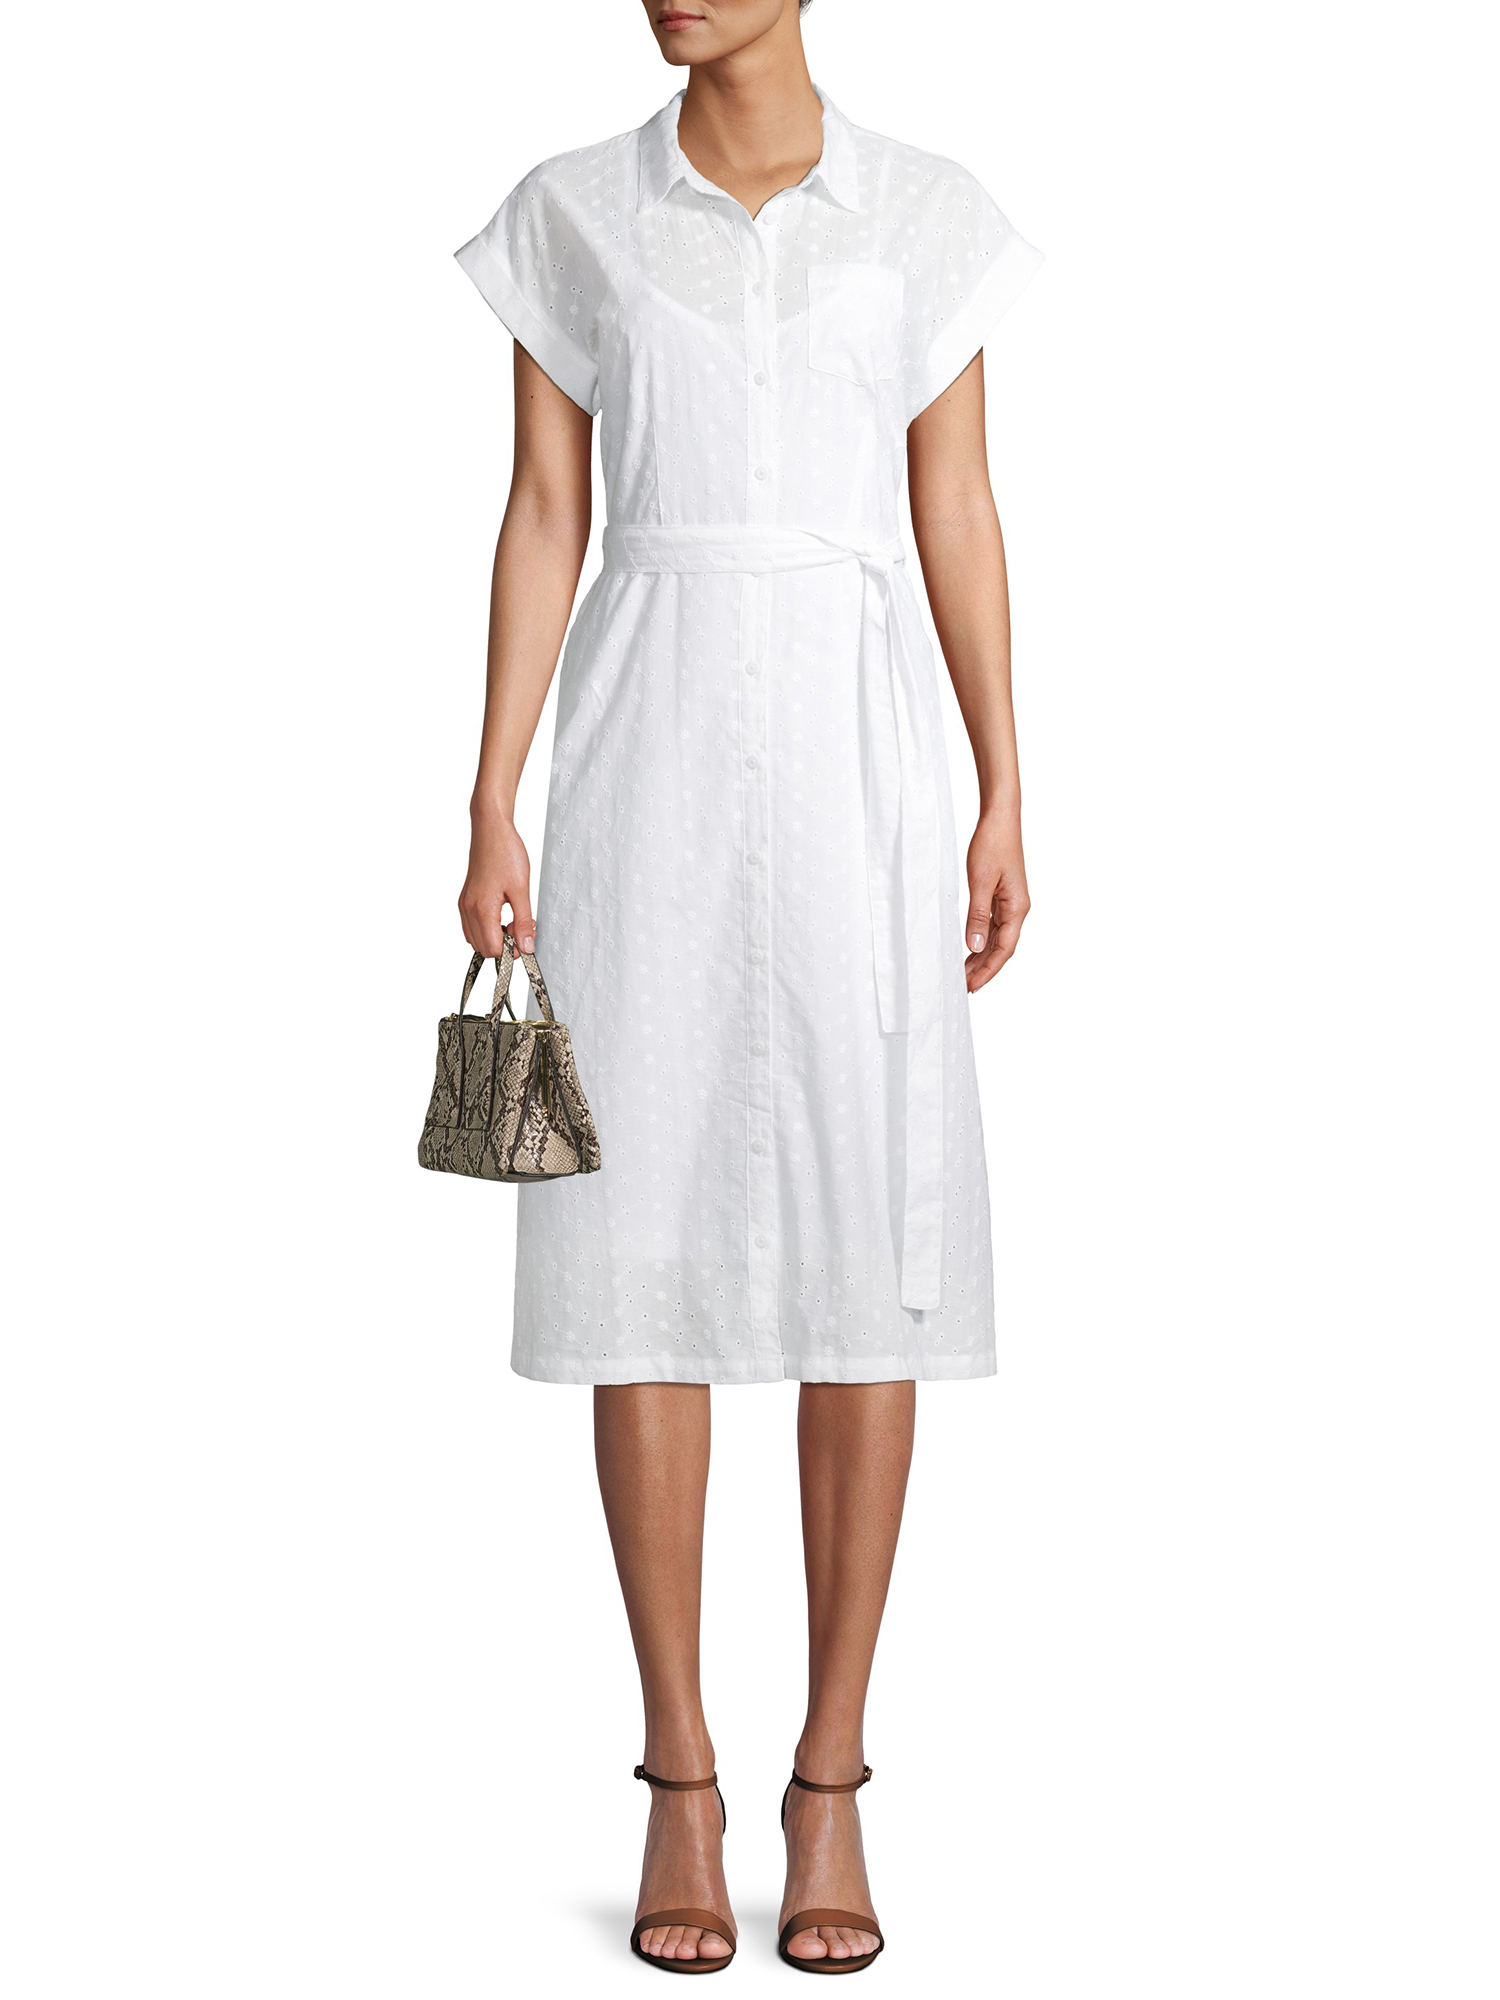 Time and Tru Women's Eyelet Belted Midi Shirt Dress - image 6 of 6